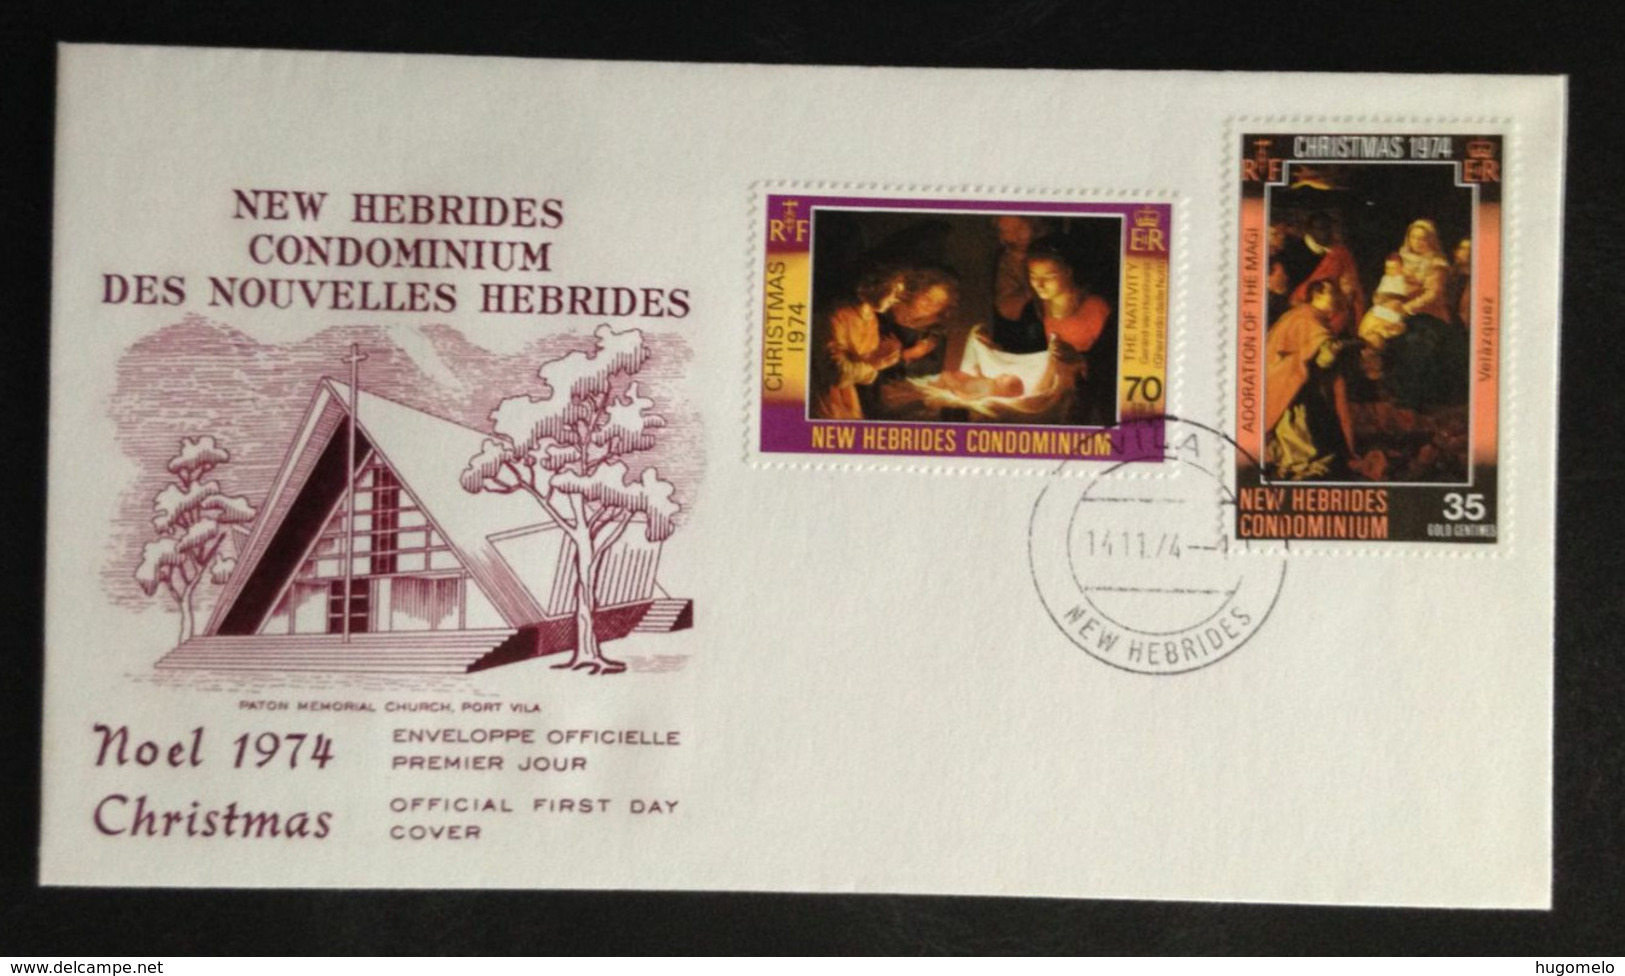 NEW HEBRIDES, Uncirculated FDC, « CHRISTMAS », 1974 - FDC